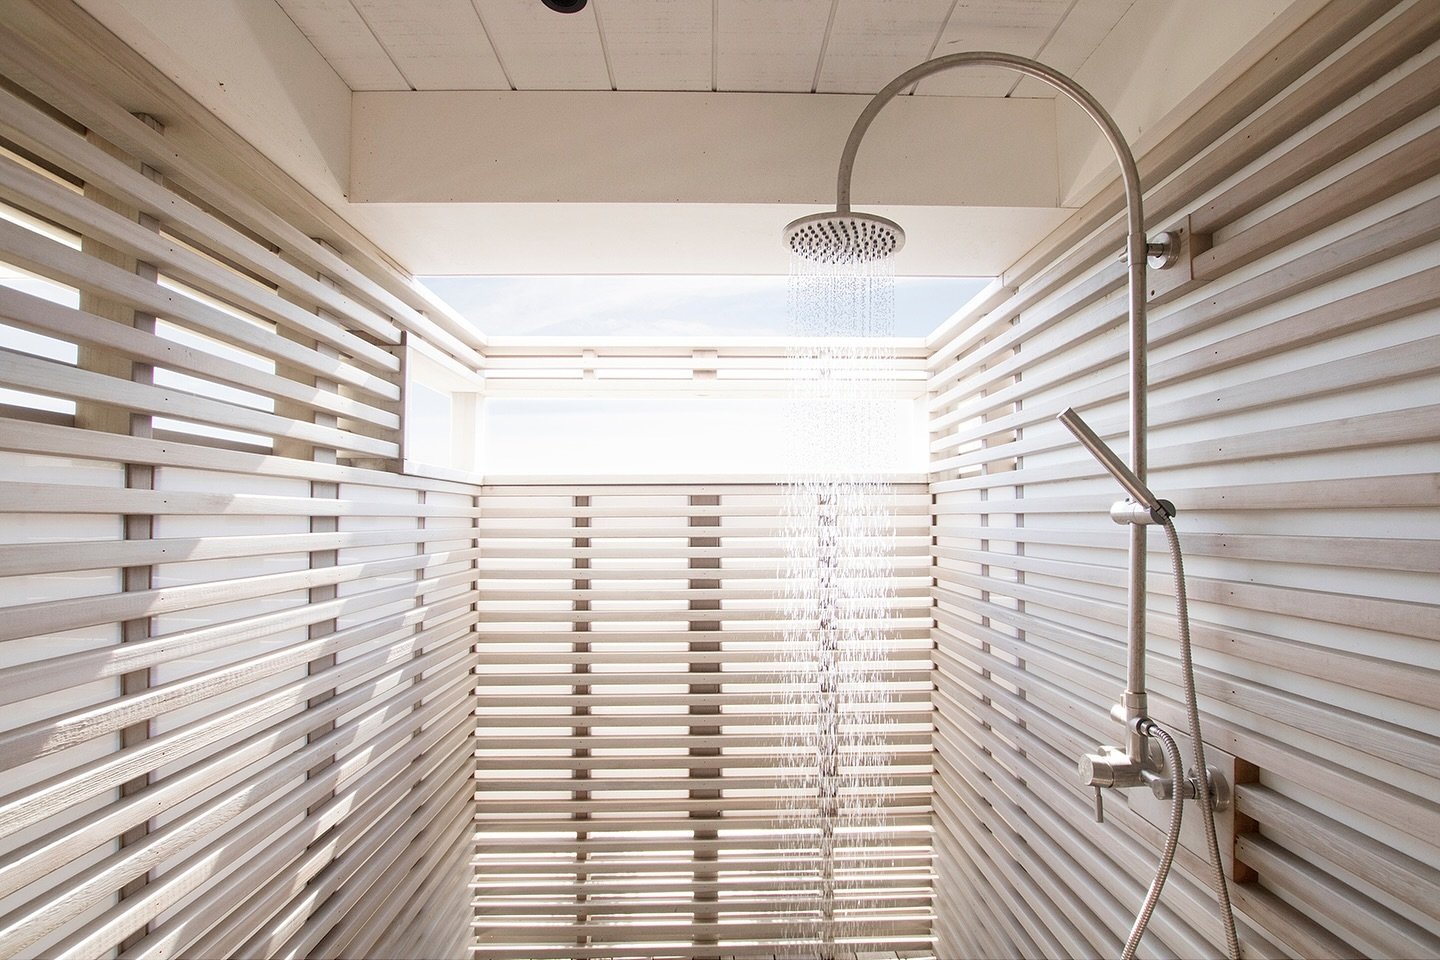 This outdoor shower at the Lido Beach House II provides privacy while using sunlight and natural materials to create a great space to shower after coming back from the beach.

To see more of this project check out Lido Beach House II on our website (